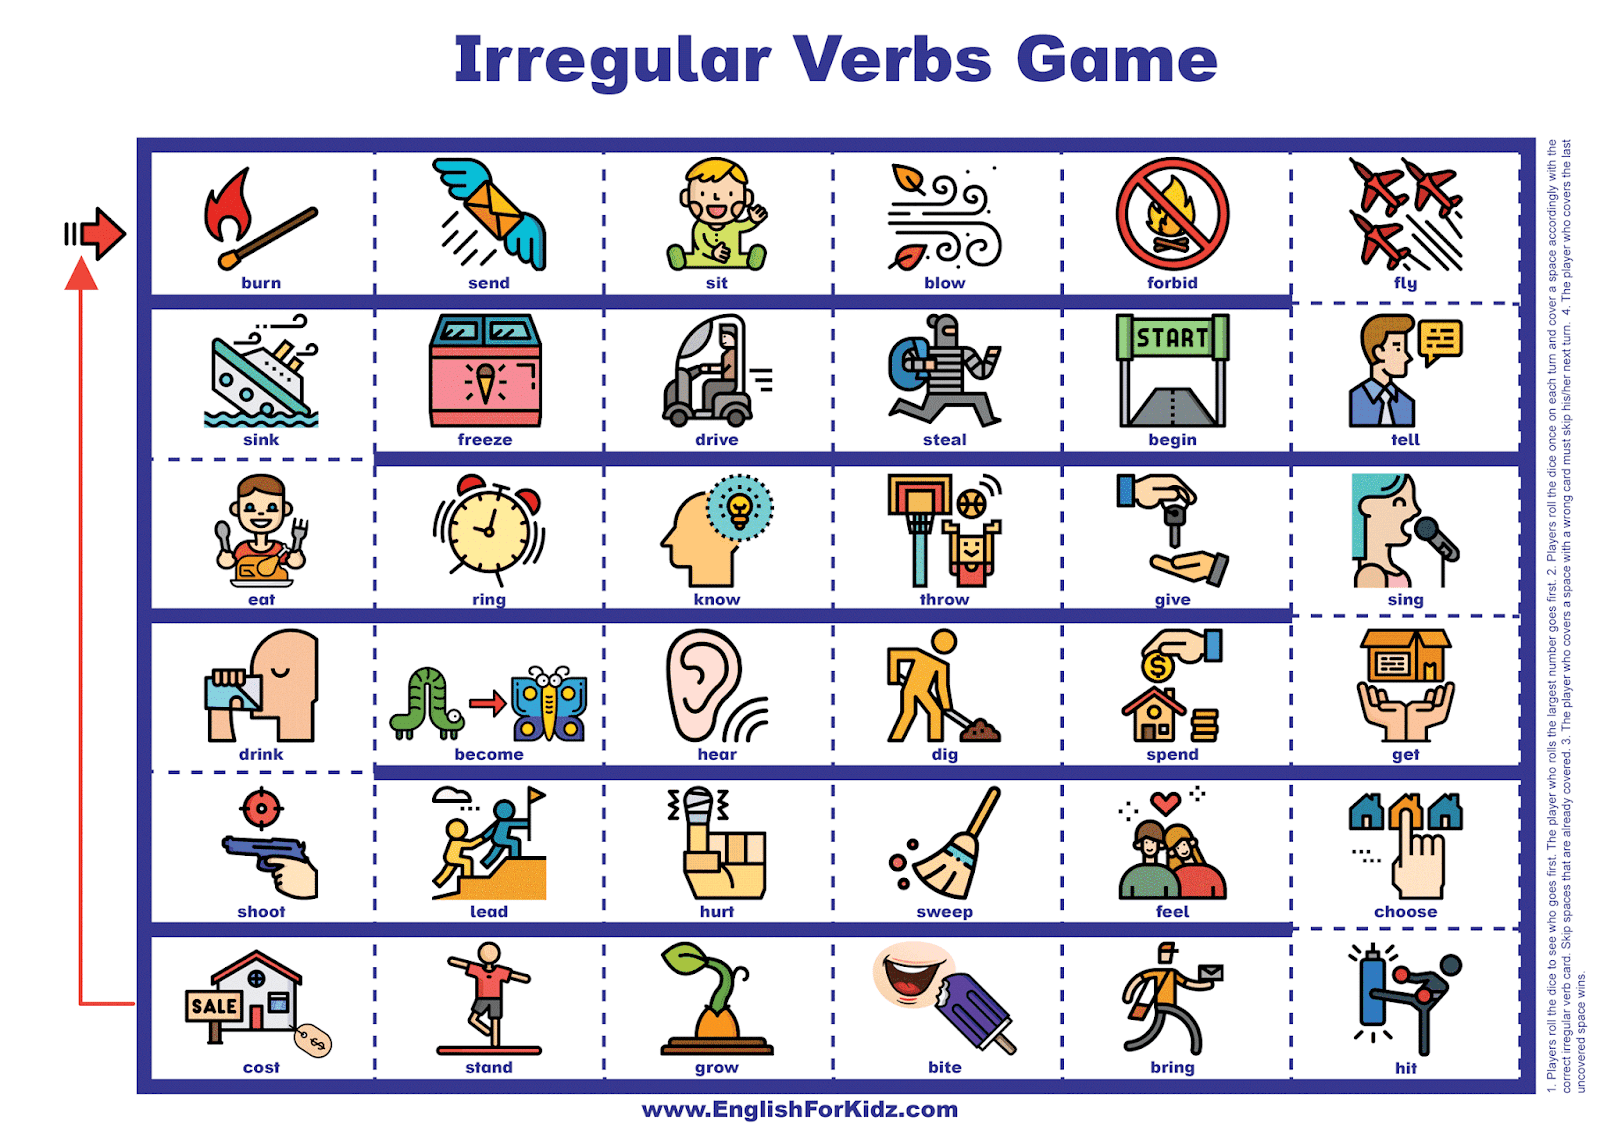 english-for-kids-step-by-step-irregular-verbs-game